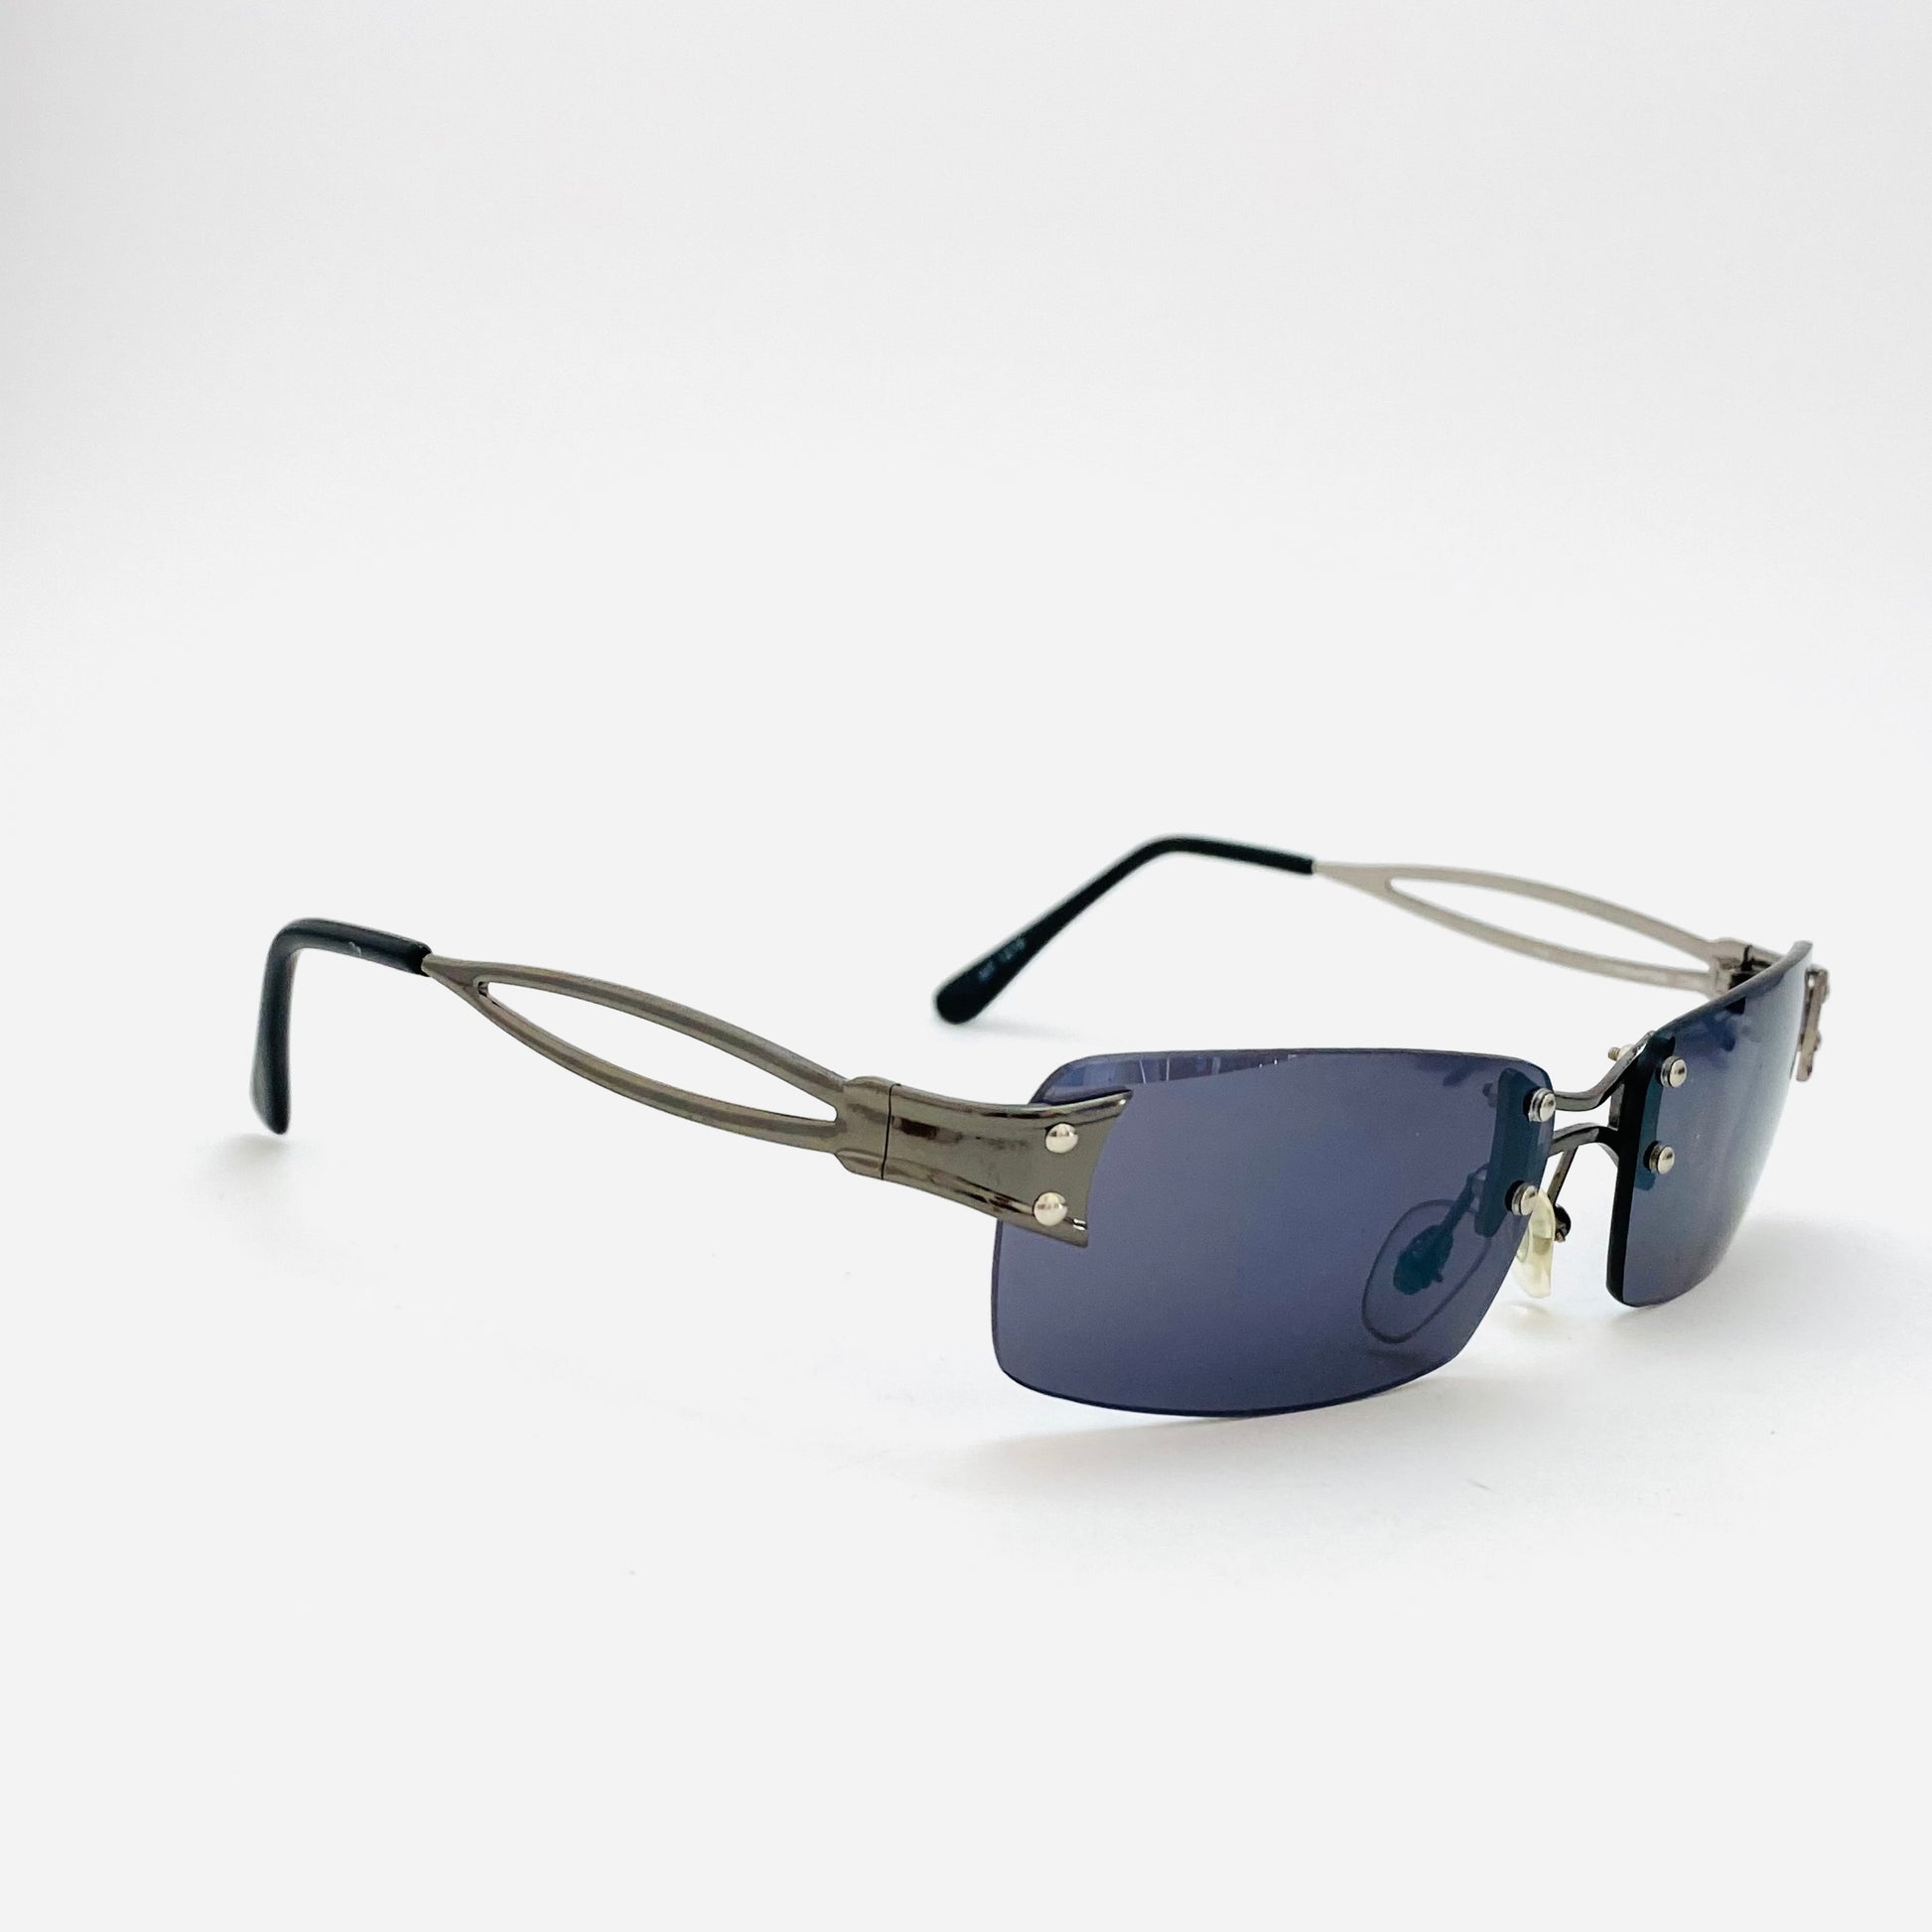 grunge style, dark lens, rimless deadstock sunglasses with grey color
